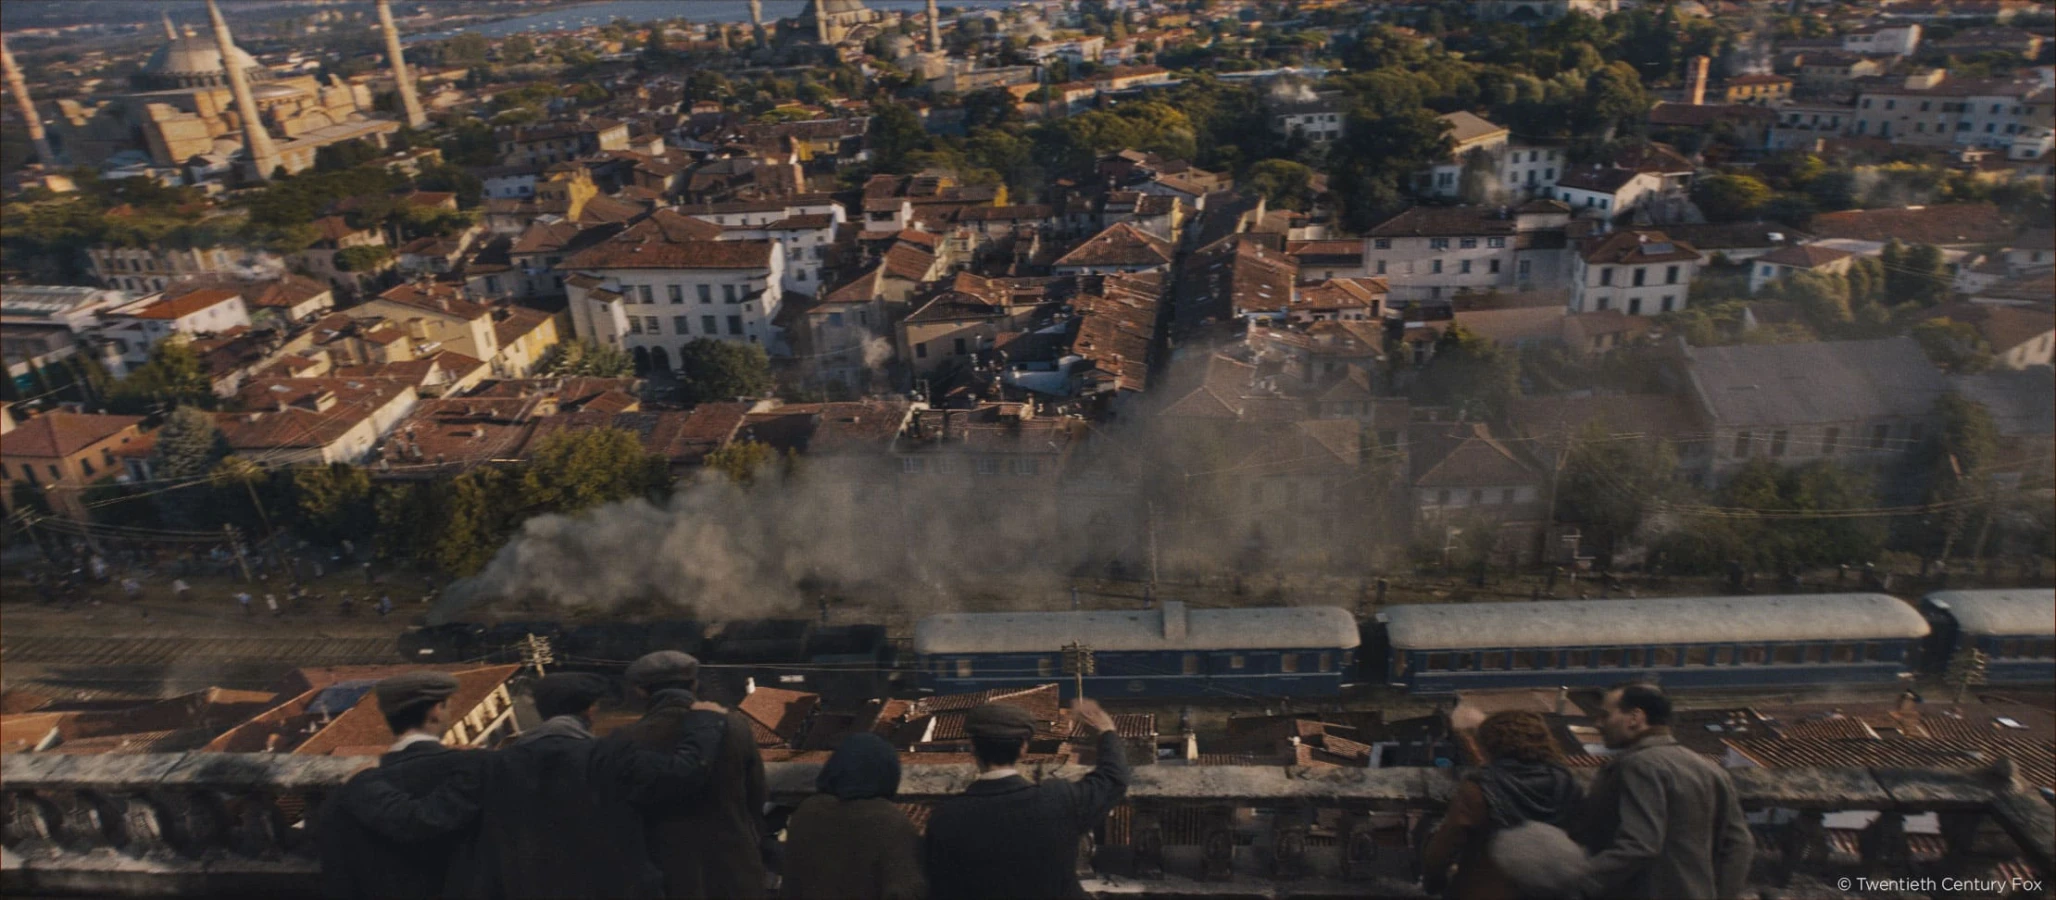  Murder on The Orient Express view shot of train passing in city Raynault vfx 